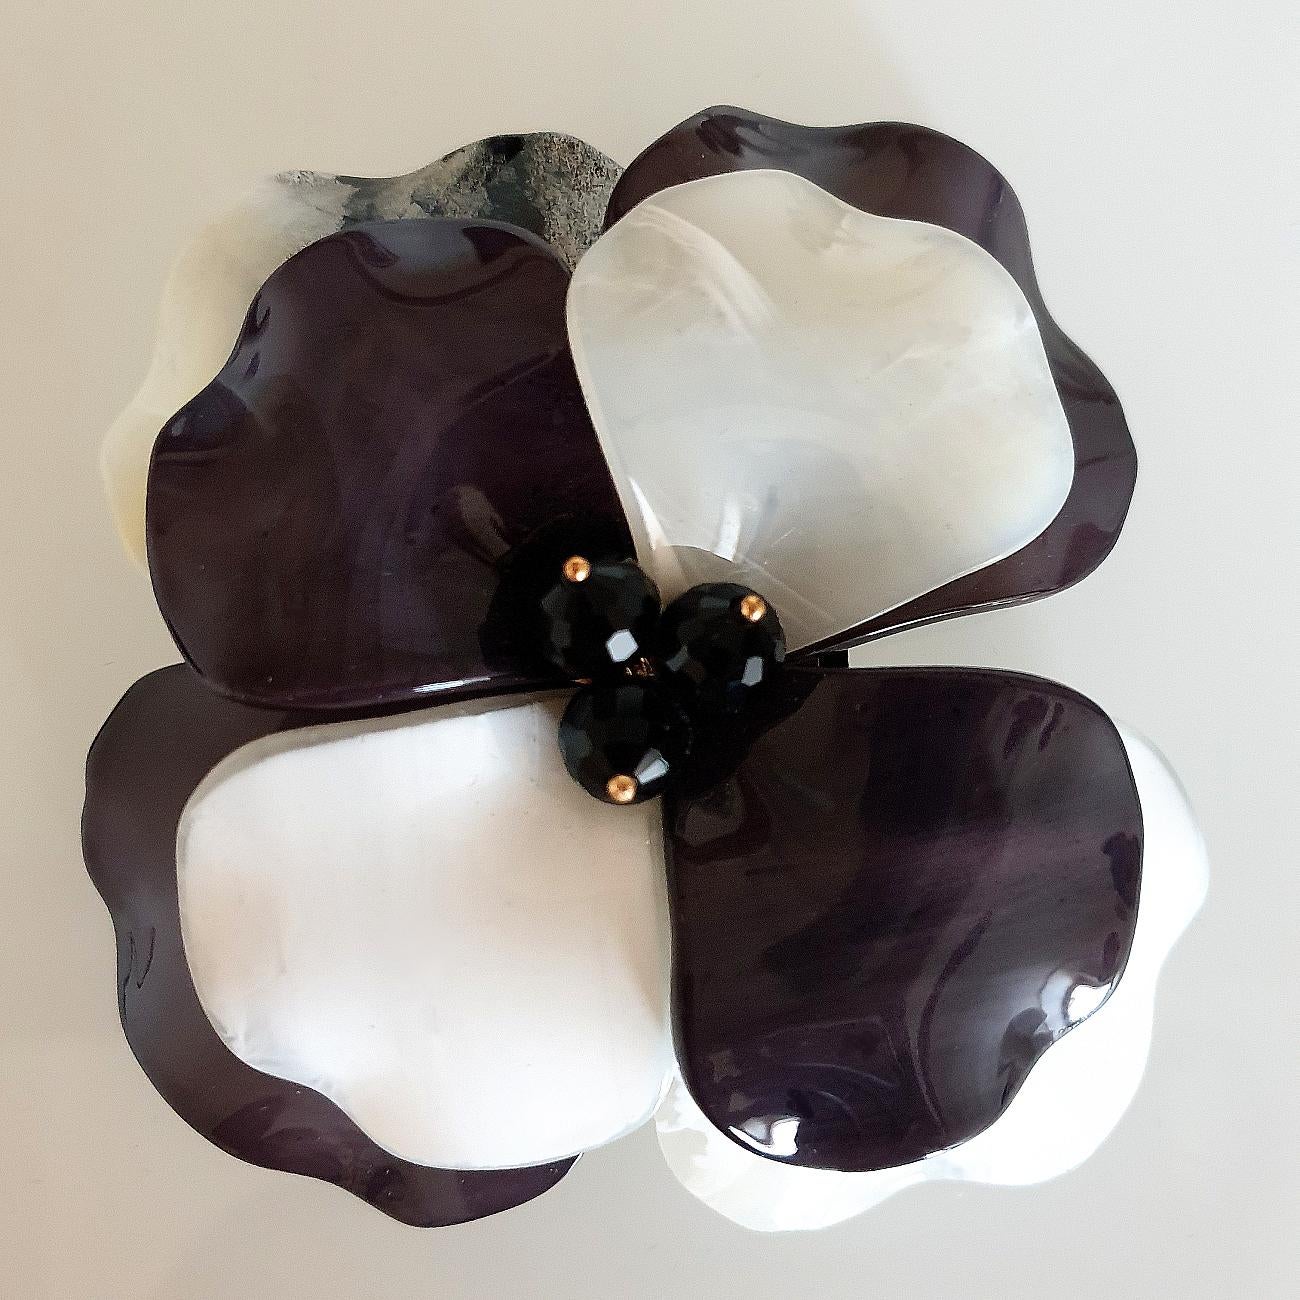 Mid Century Bakelite flower brooch, France circa 1970s.
The brooch has a flower shape, with 2 layers of four petals.
The Bakelite is dark gray and pearly white with some black veins on one petal.
Excellent condition.
Never used.